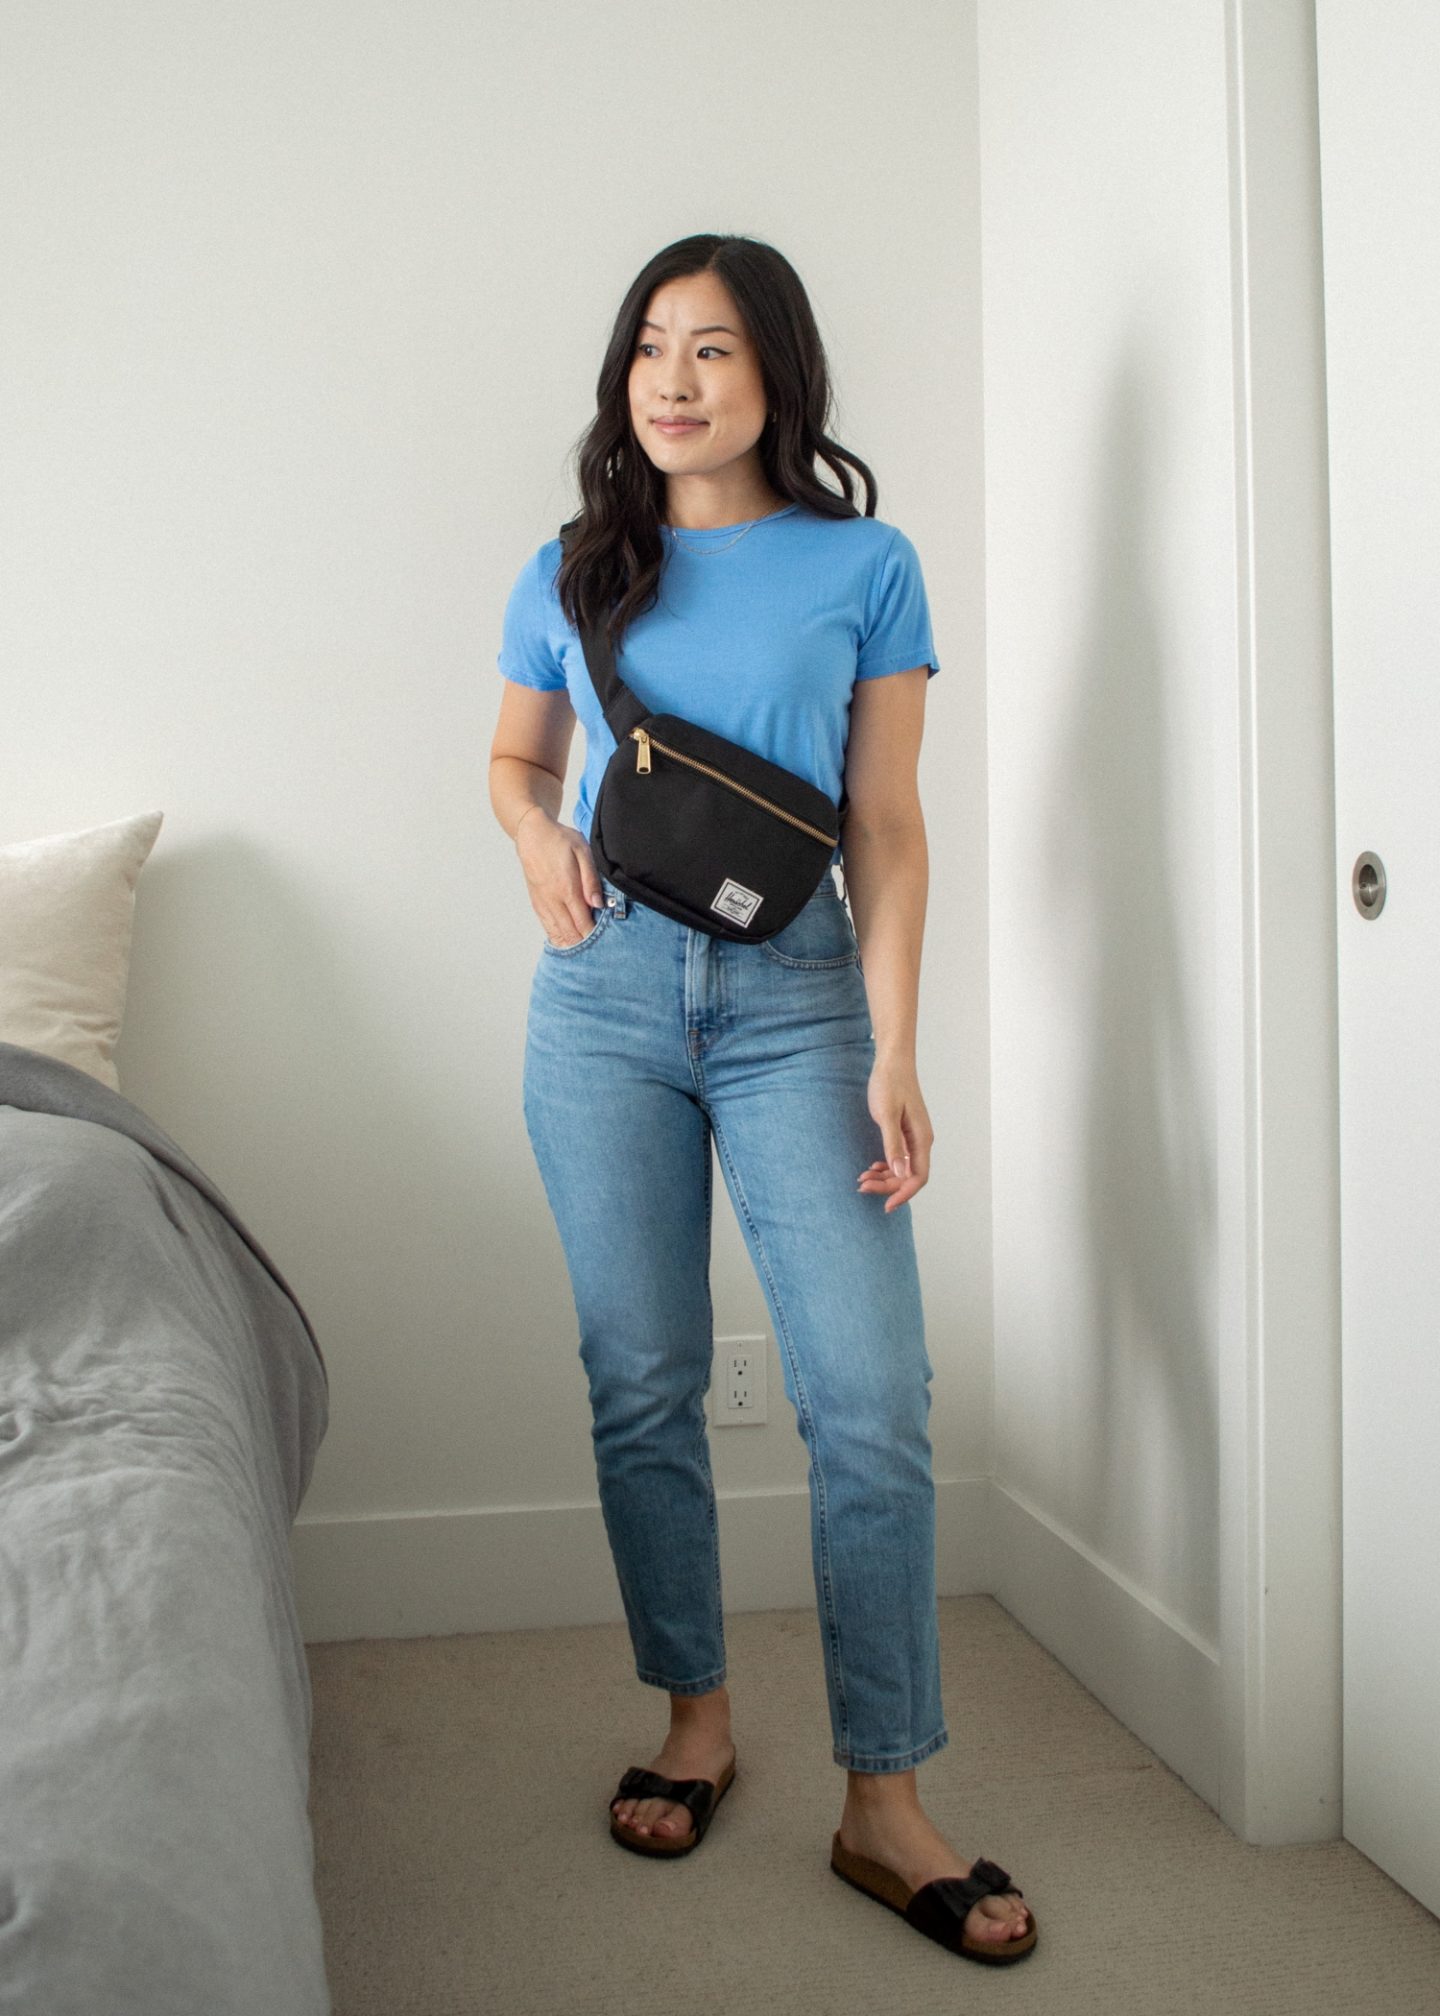 Her Simple Sole - Outfit details: Sheena Marshall Jewelry Nora Link Necklace, Encircled Fair Crew Neck in Ocean, Everlane The Original Cheeky Jeans in Sky Blue, Herschel Fifteen Hip Pack